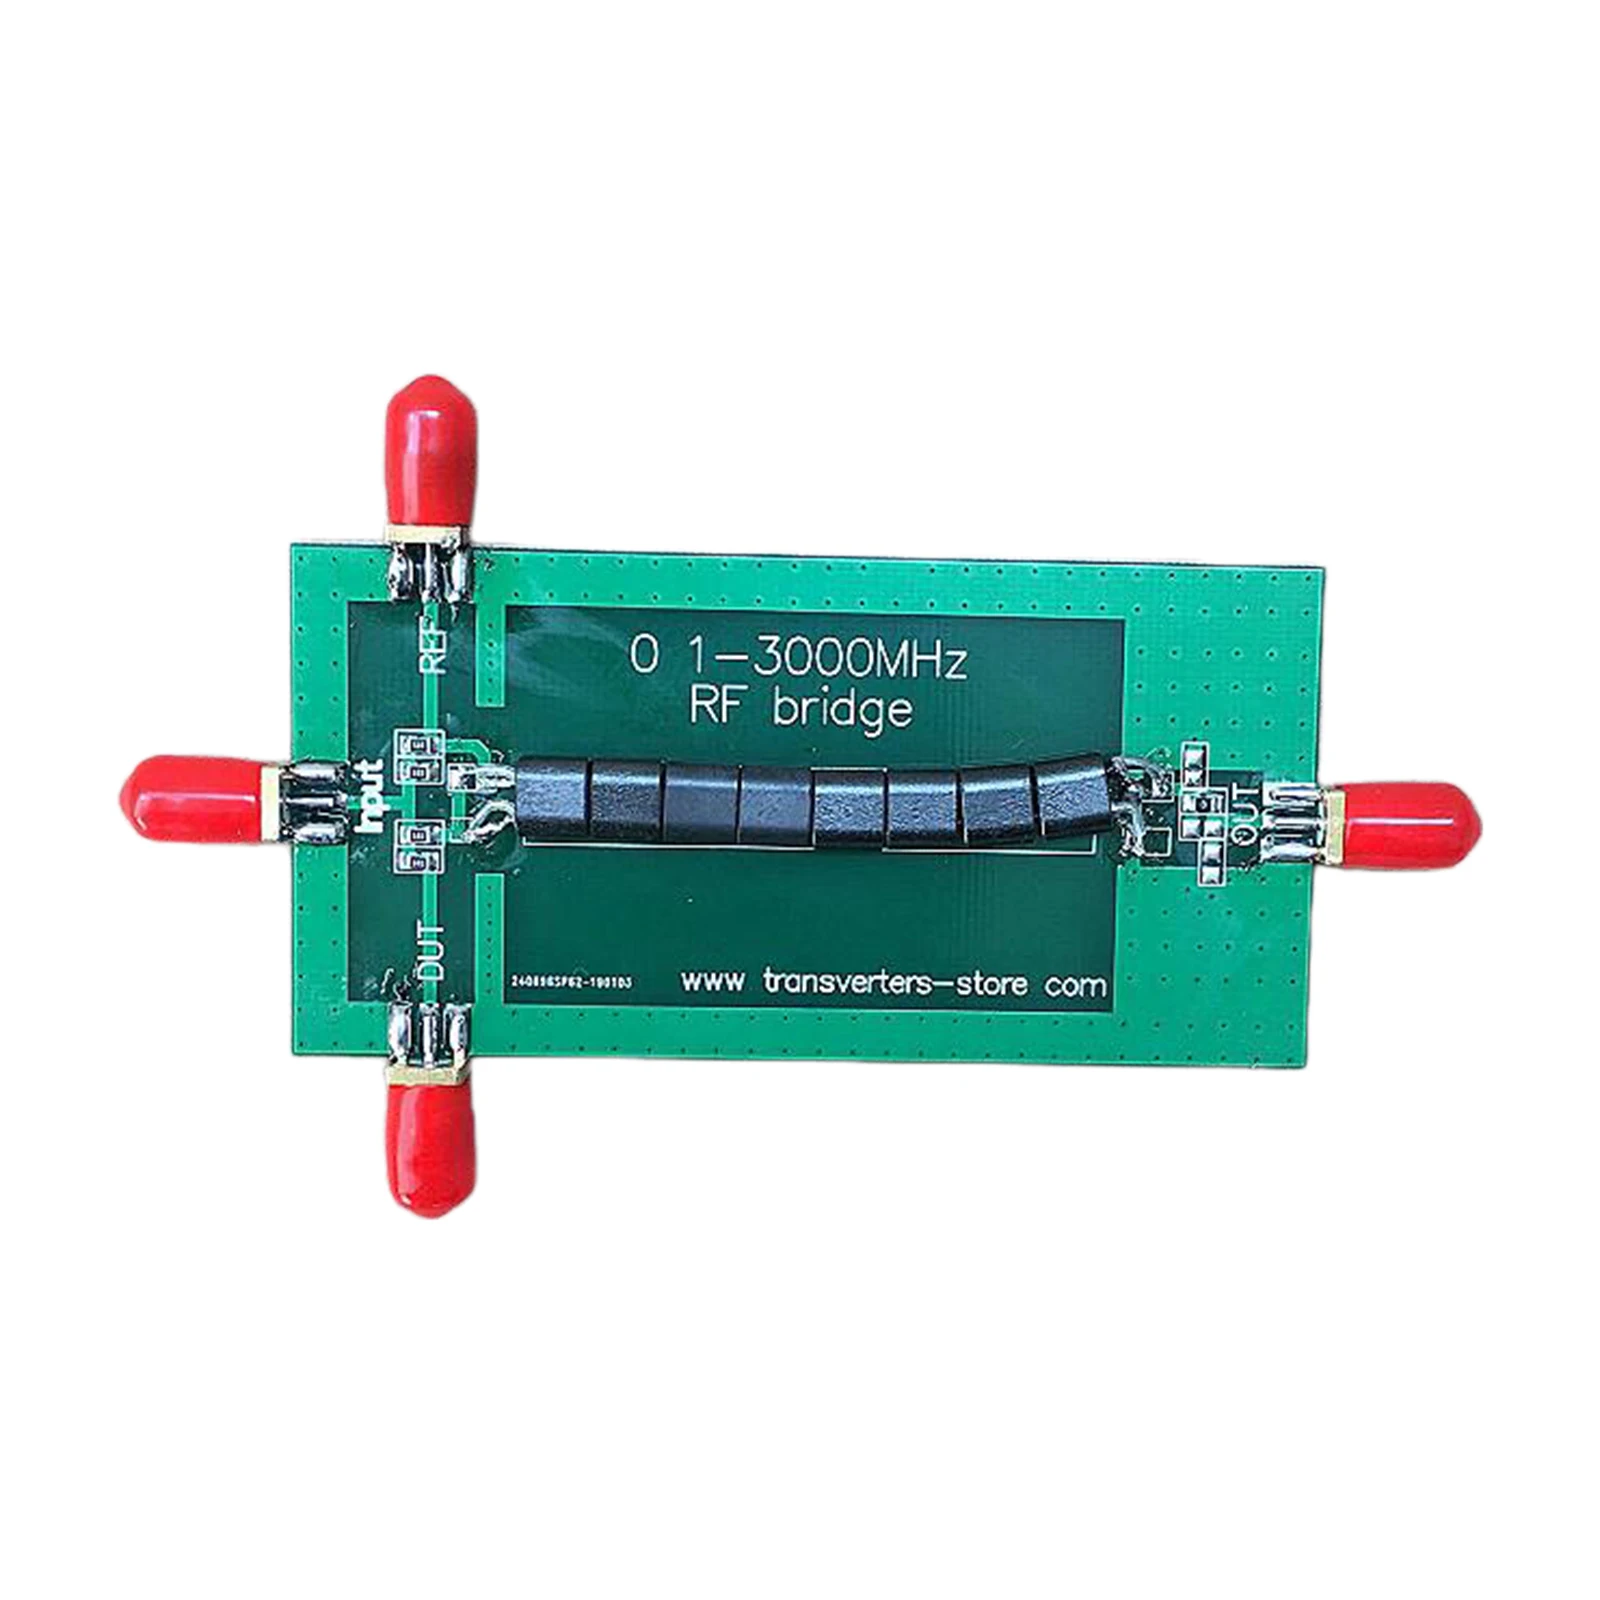 RF Bridge 0.1-3000 MHz Connectors: SMA 45x90x20mm Durable Practical Easy and Conveneint to Use